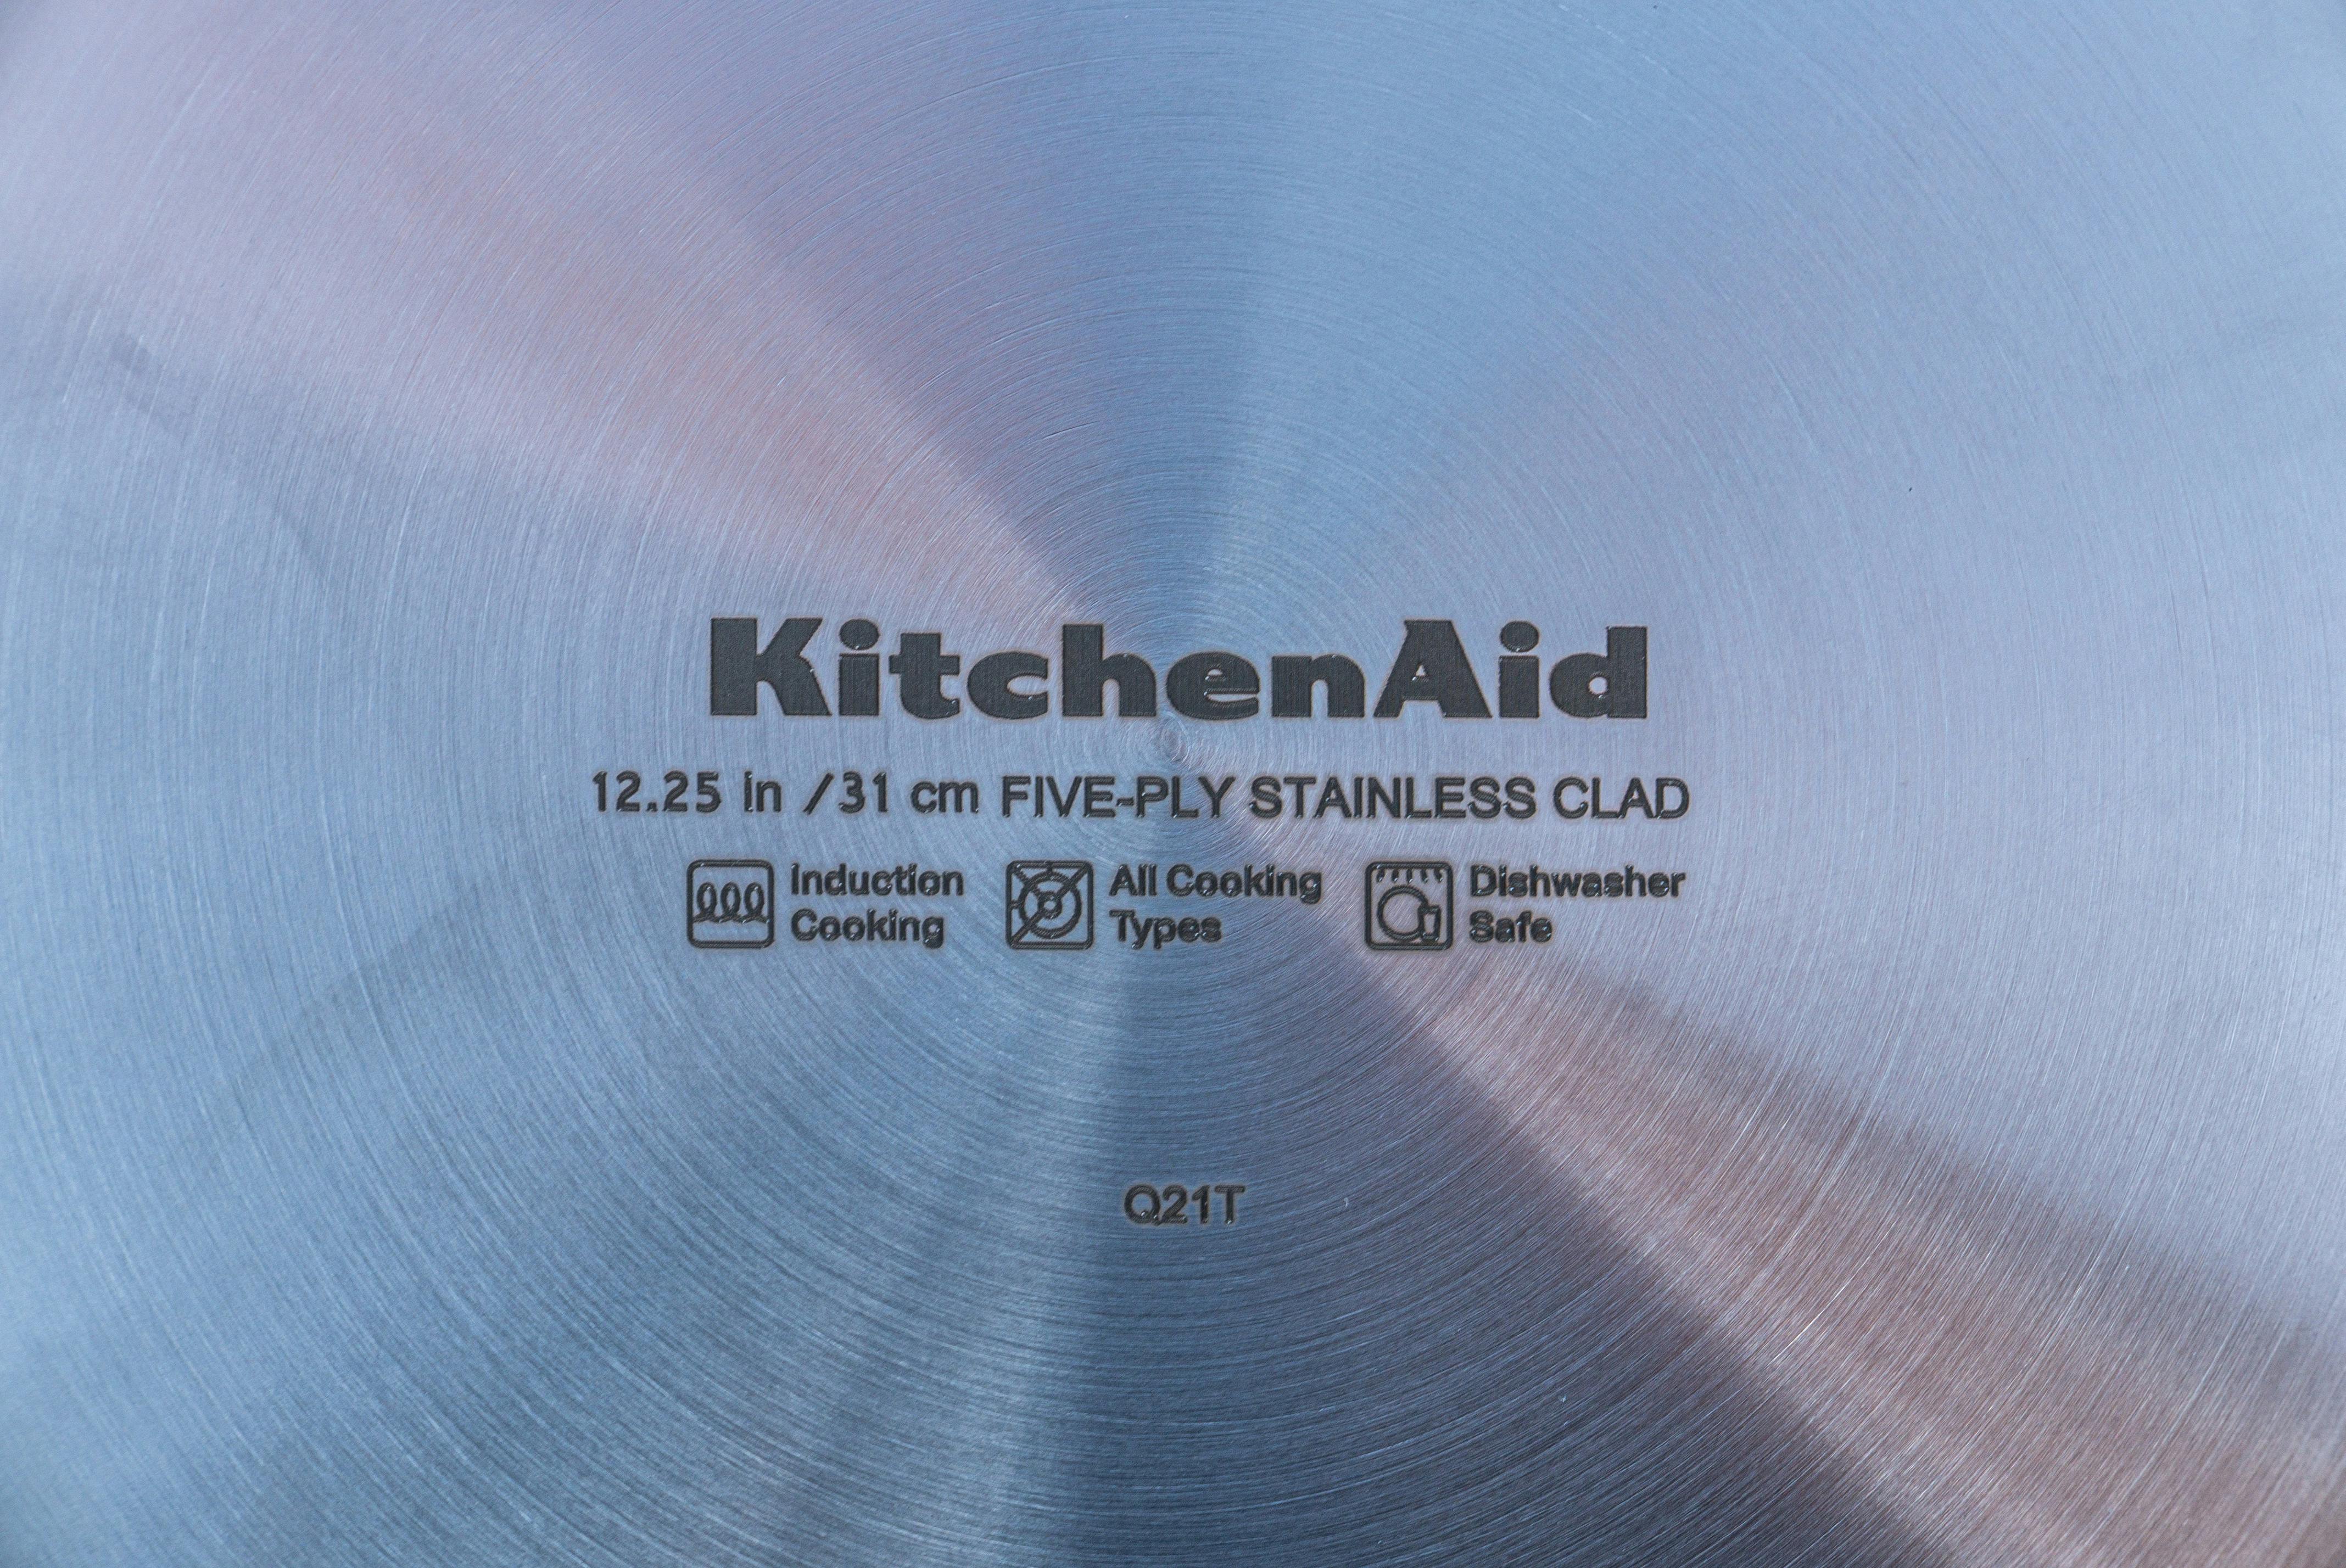 Bottom of the KitchenAid 5-Ply Clad Stainless Steel Induction Frying Pan, 10-Inch, Polished Stainless Steel.